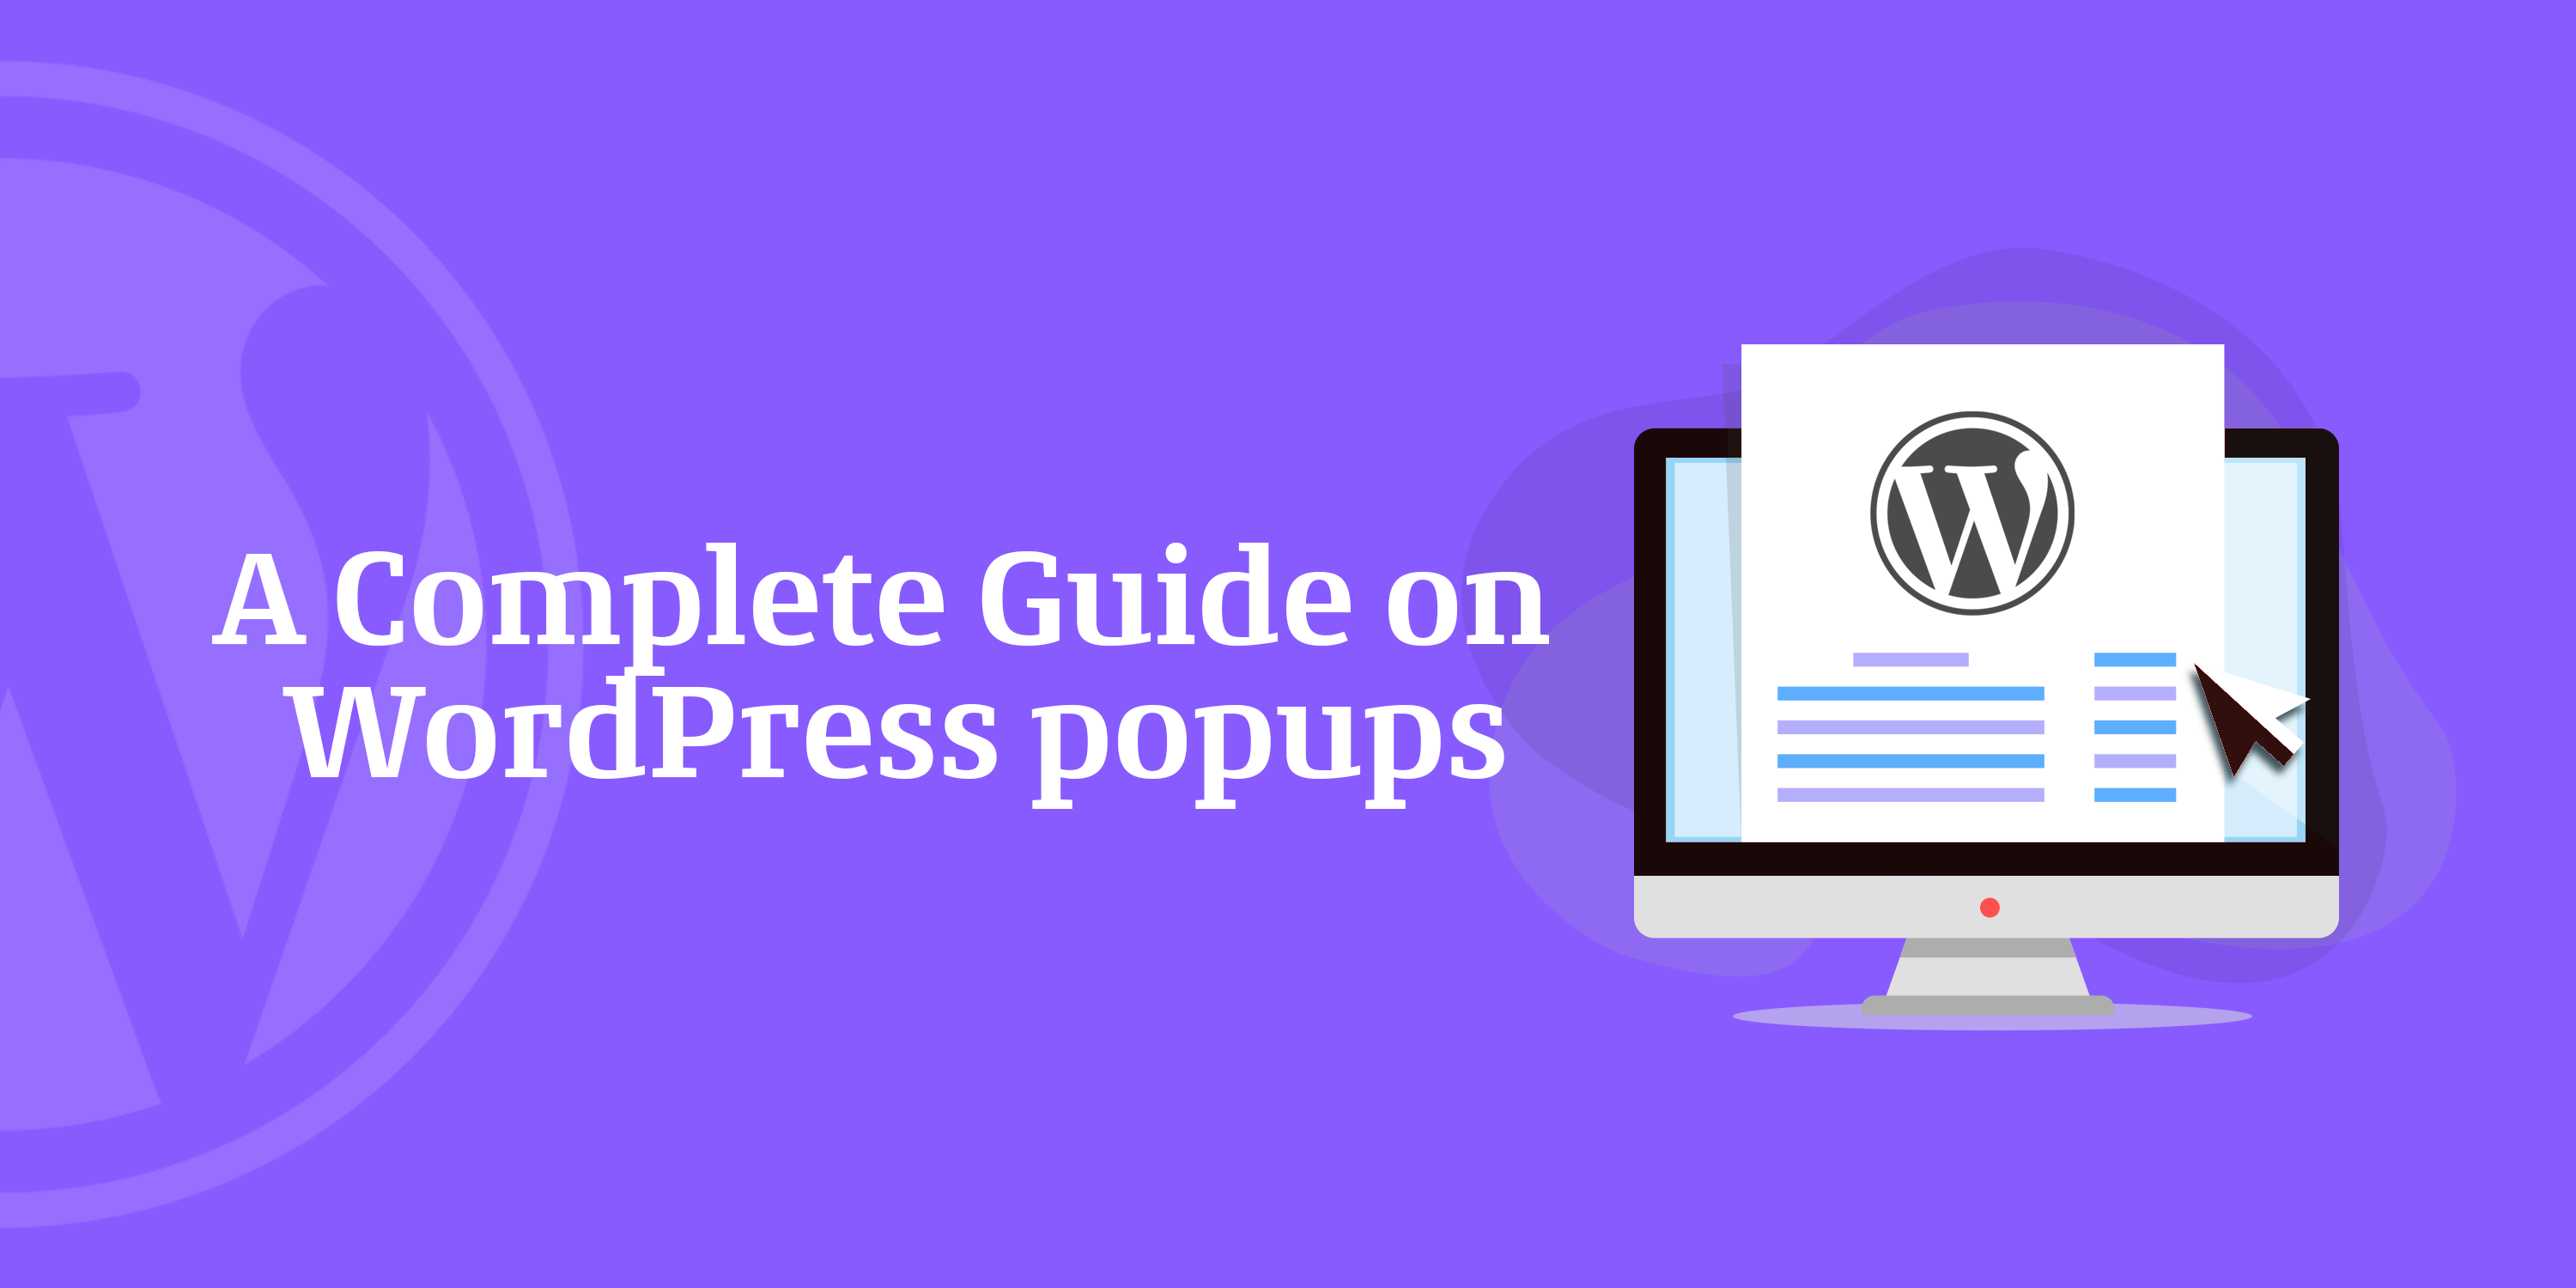 WordPress Popups: A Complete Guide